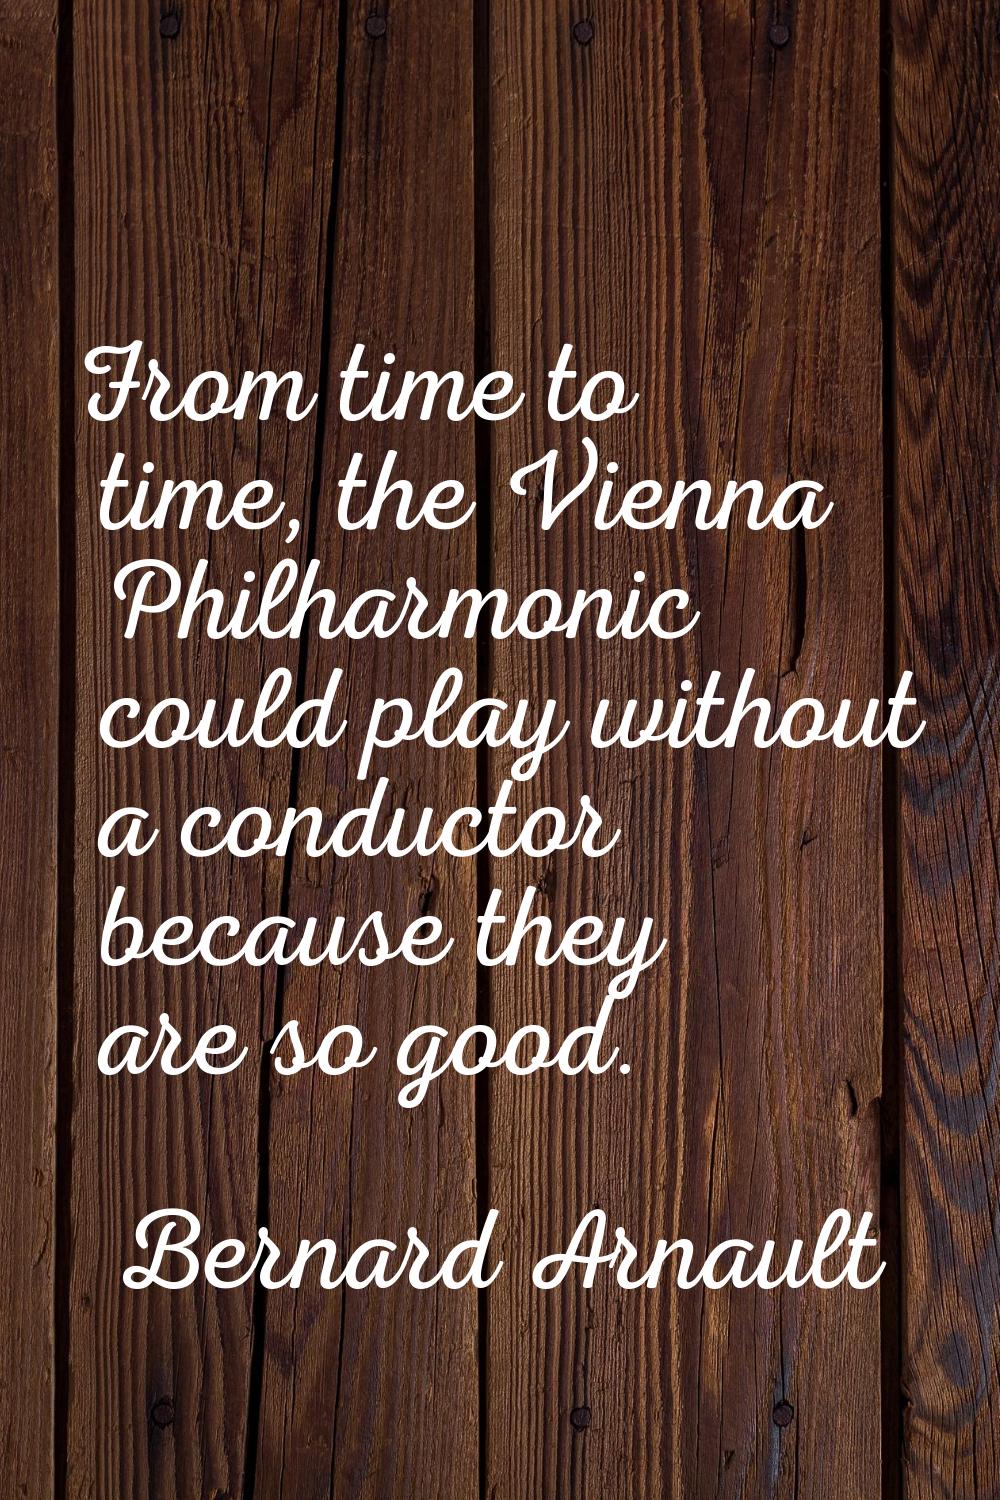 From time to time, the Vienna Philharmonic could play without a conductor because they are so good.